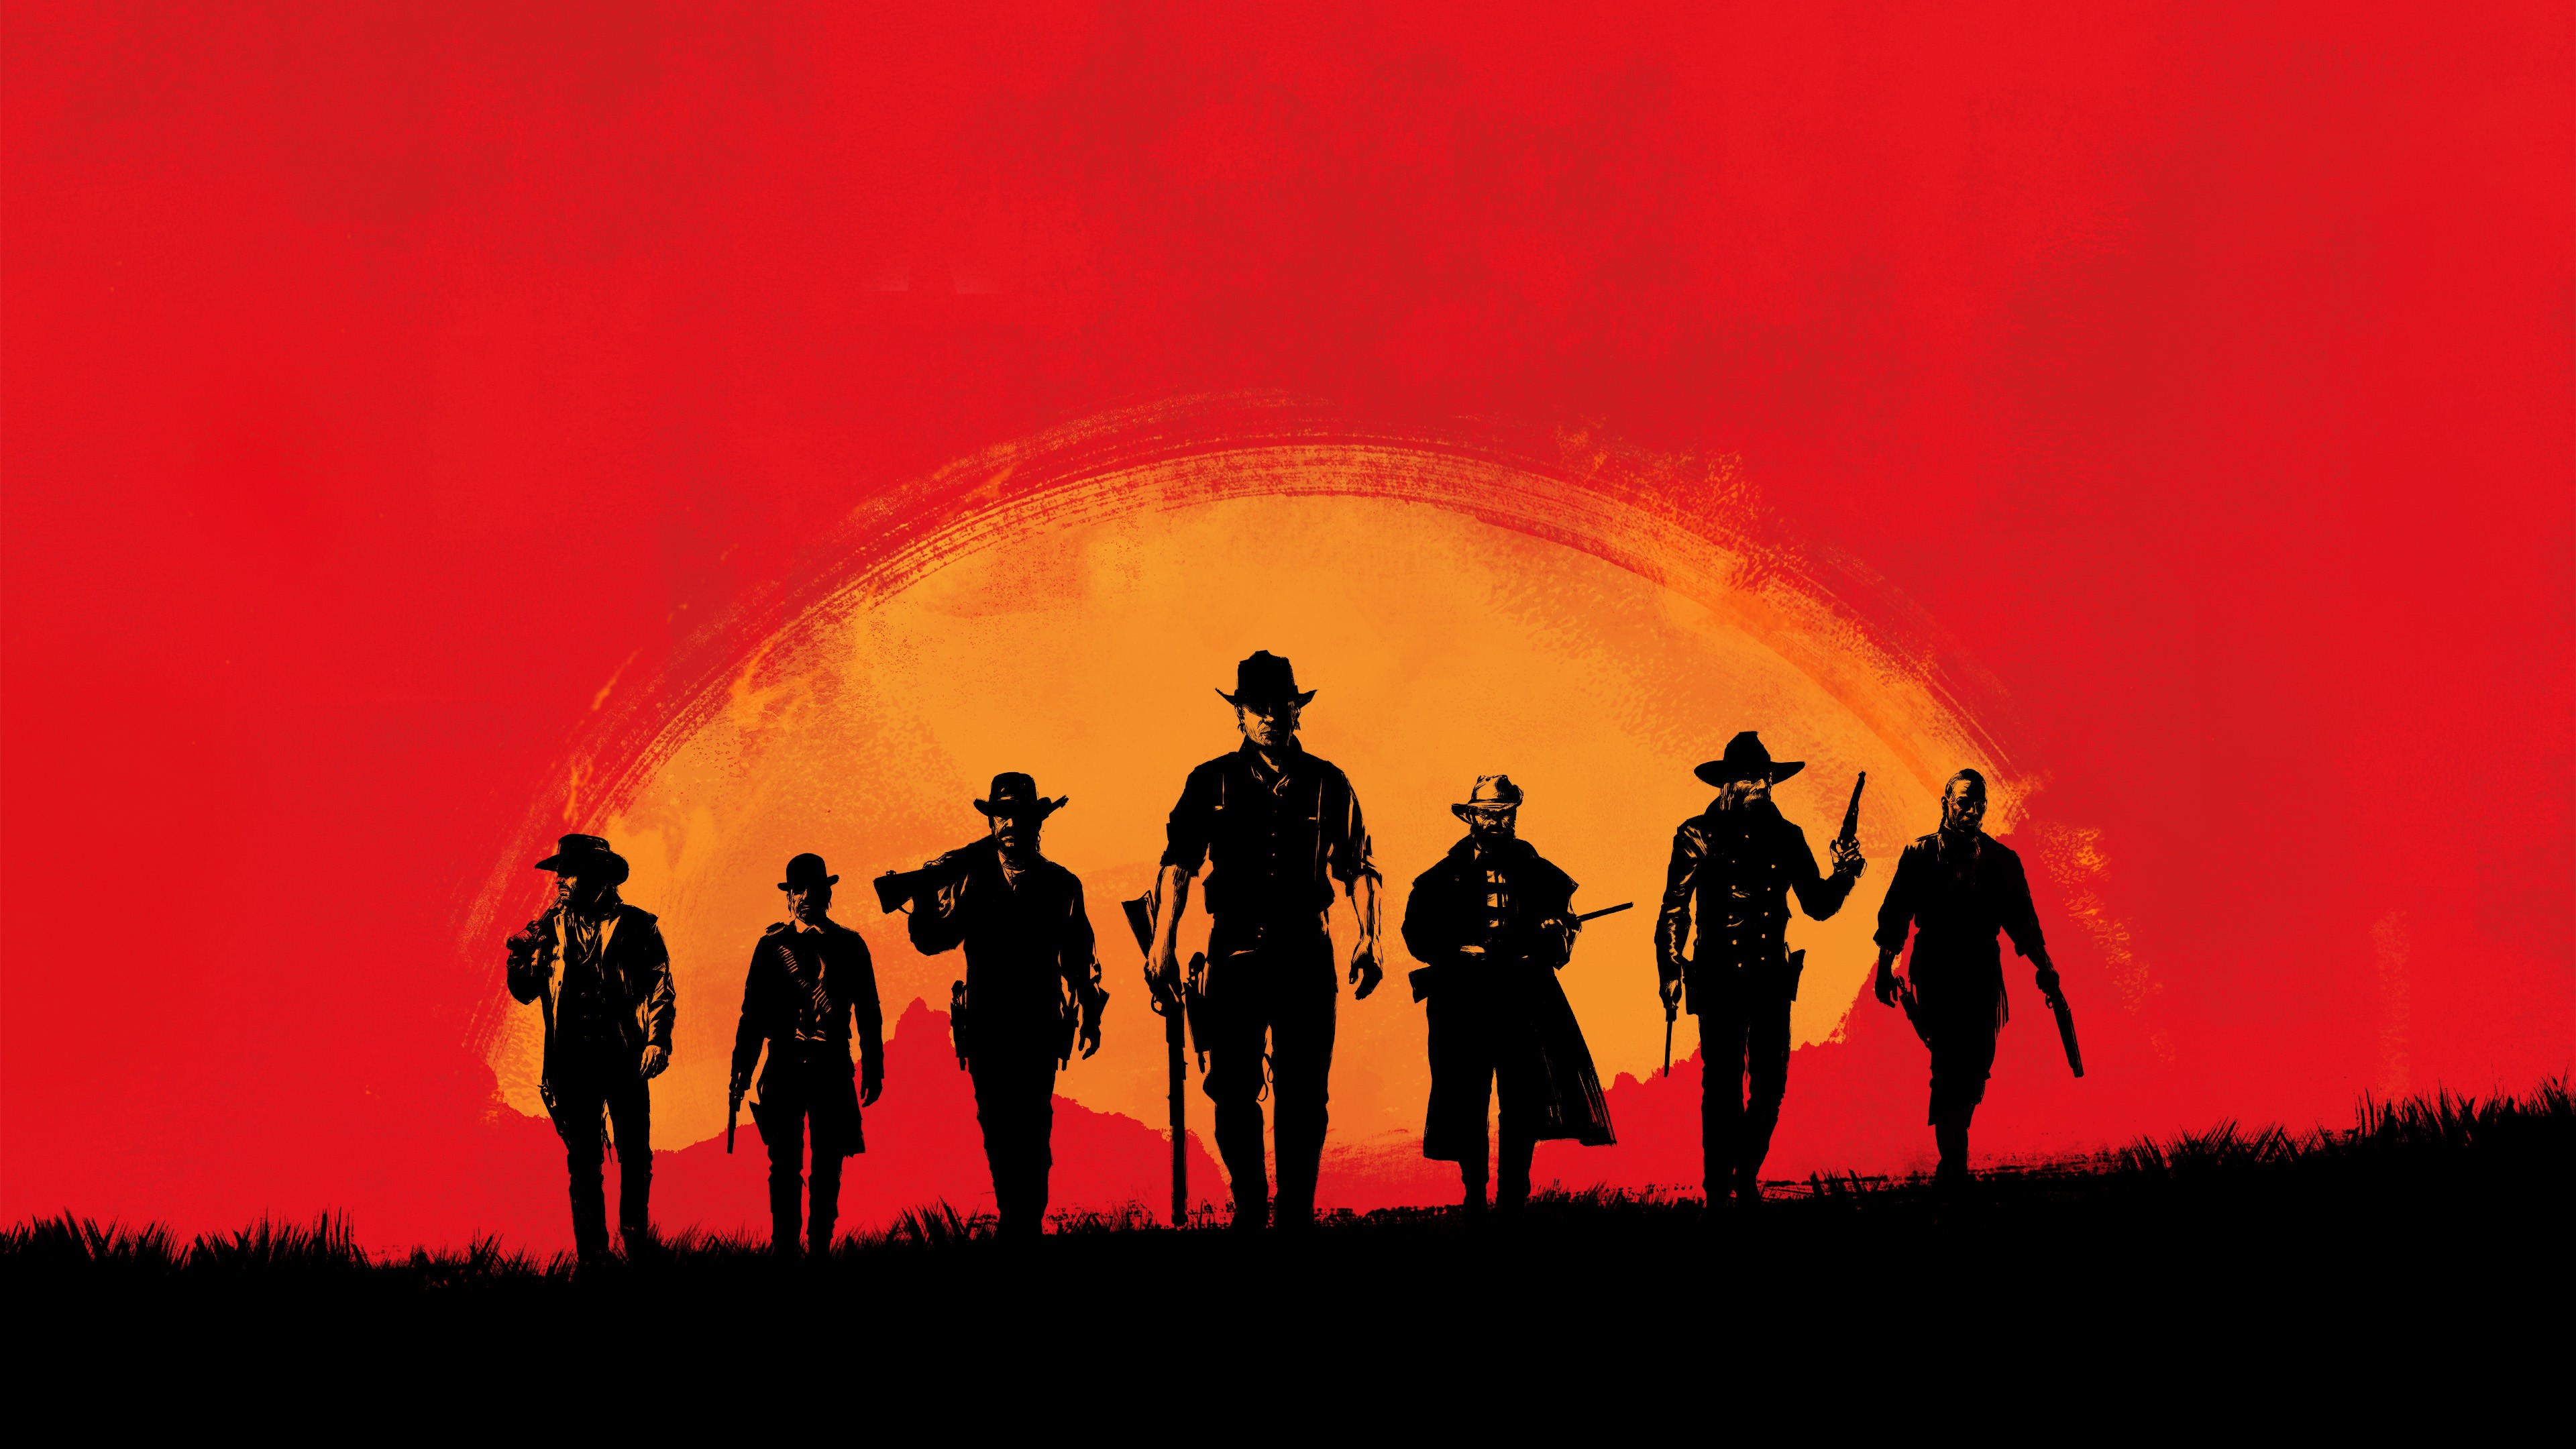 red dead redemption wallpaper,red,silhouette,sky,art,illustration